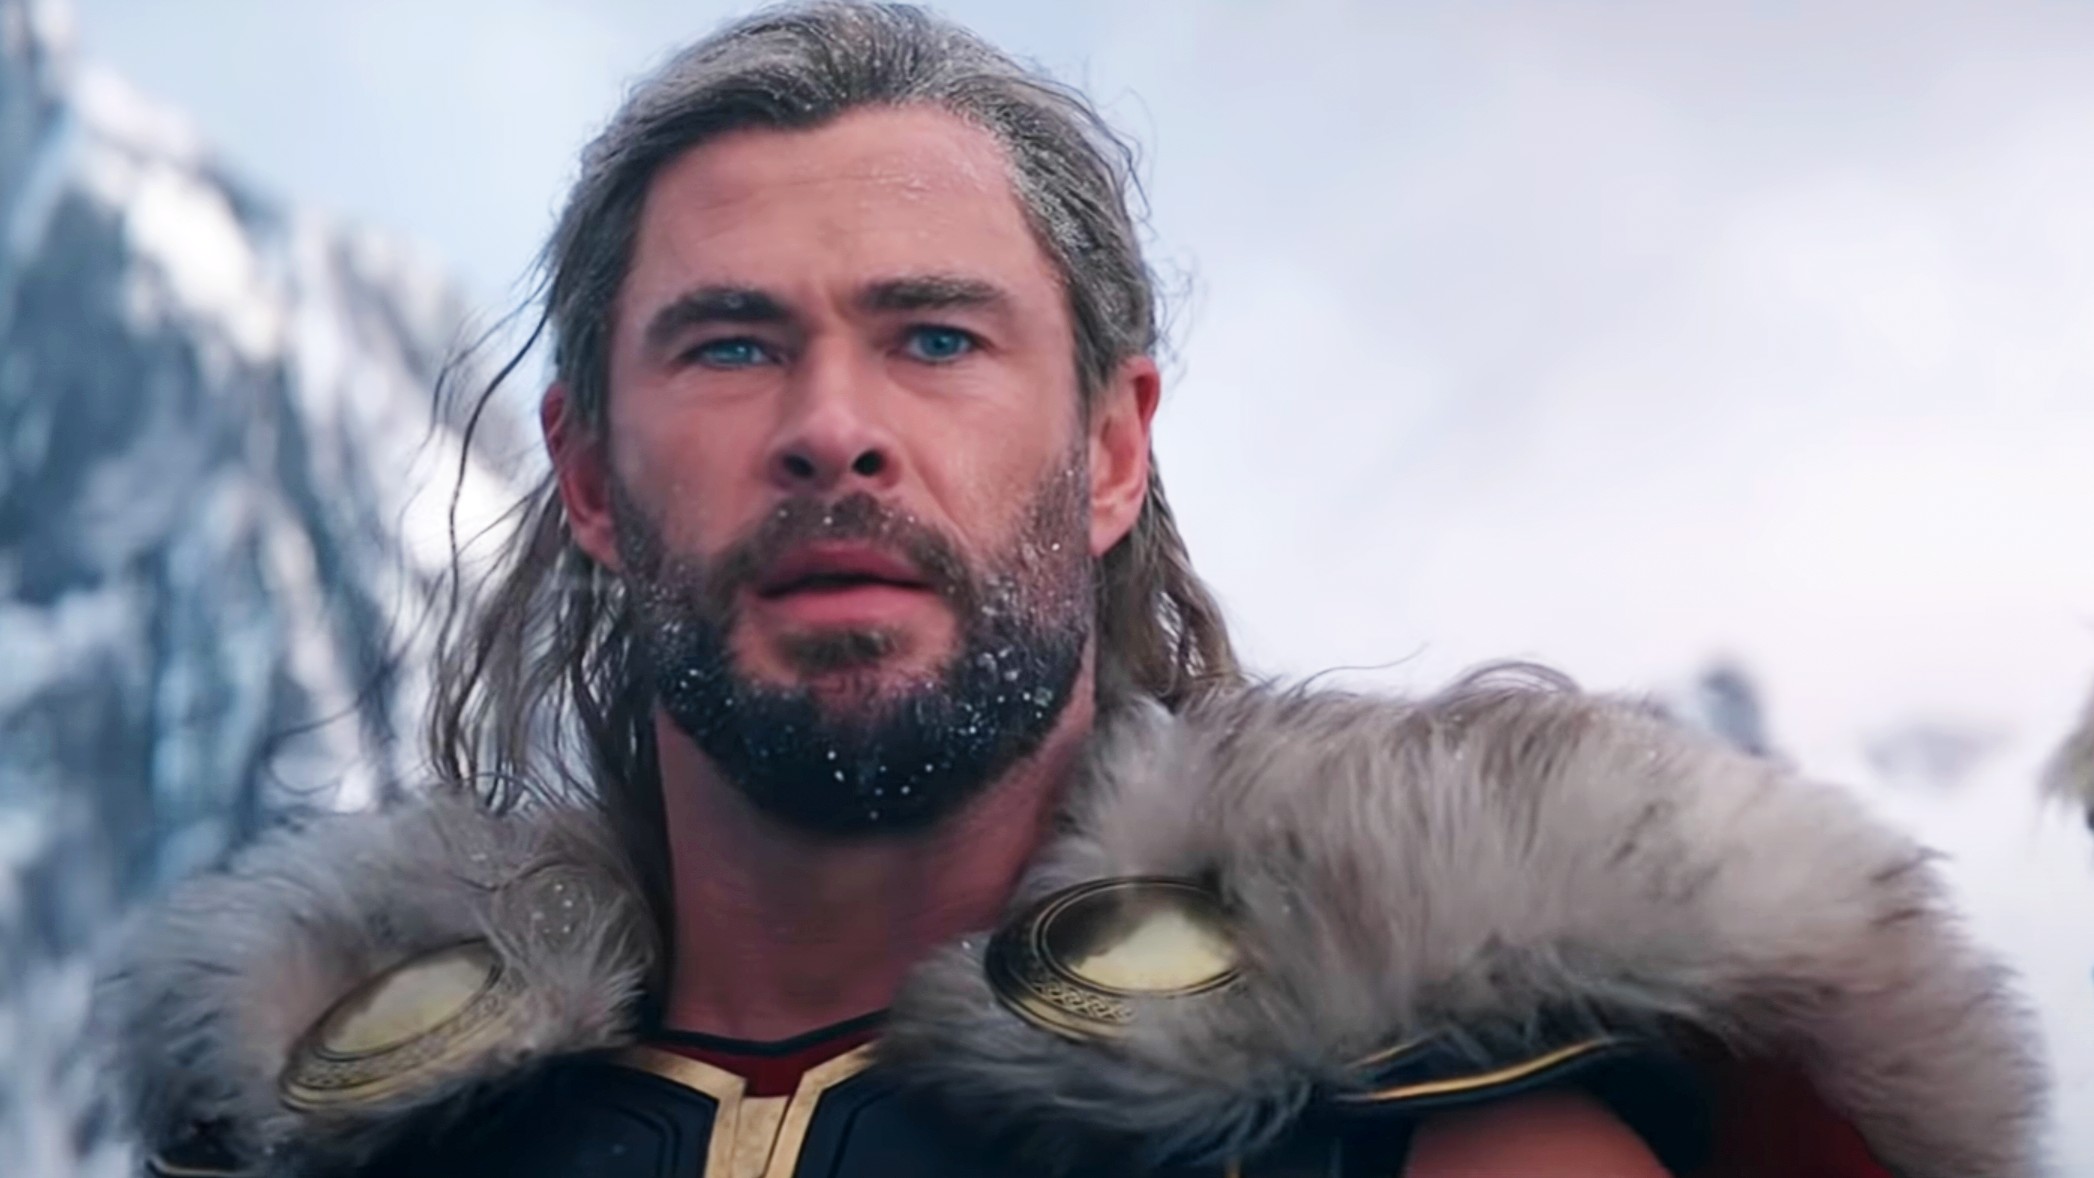 Thor: Love and Thunder's Runtime Is Shorter Than Expected